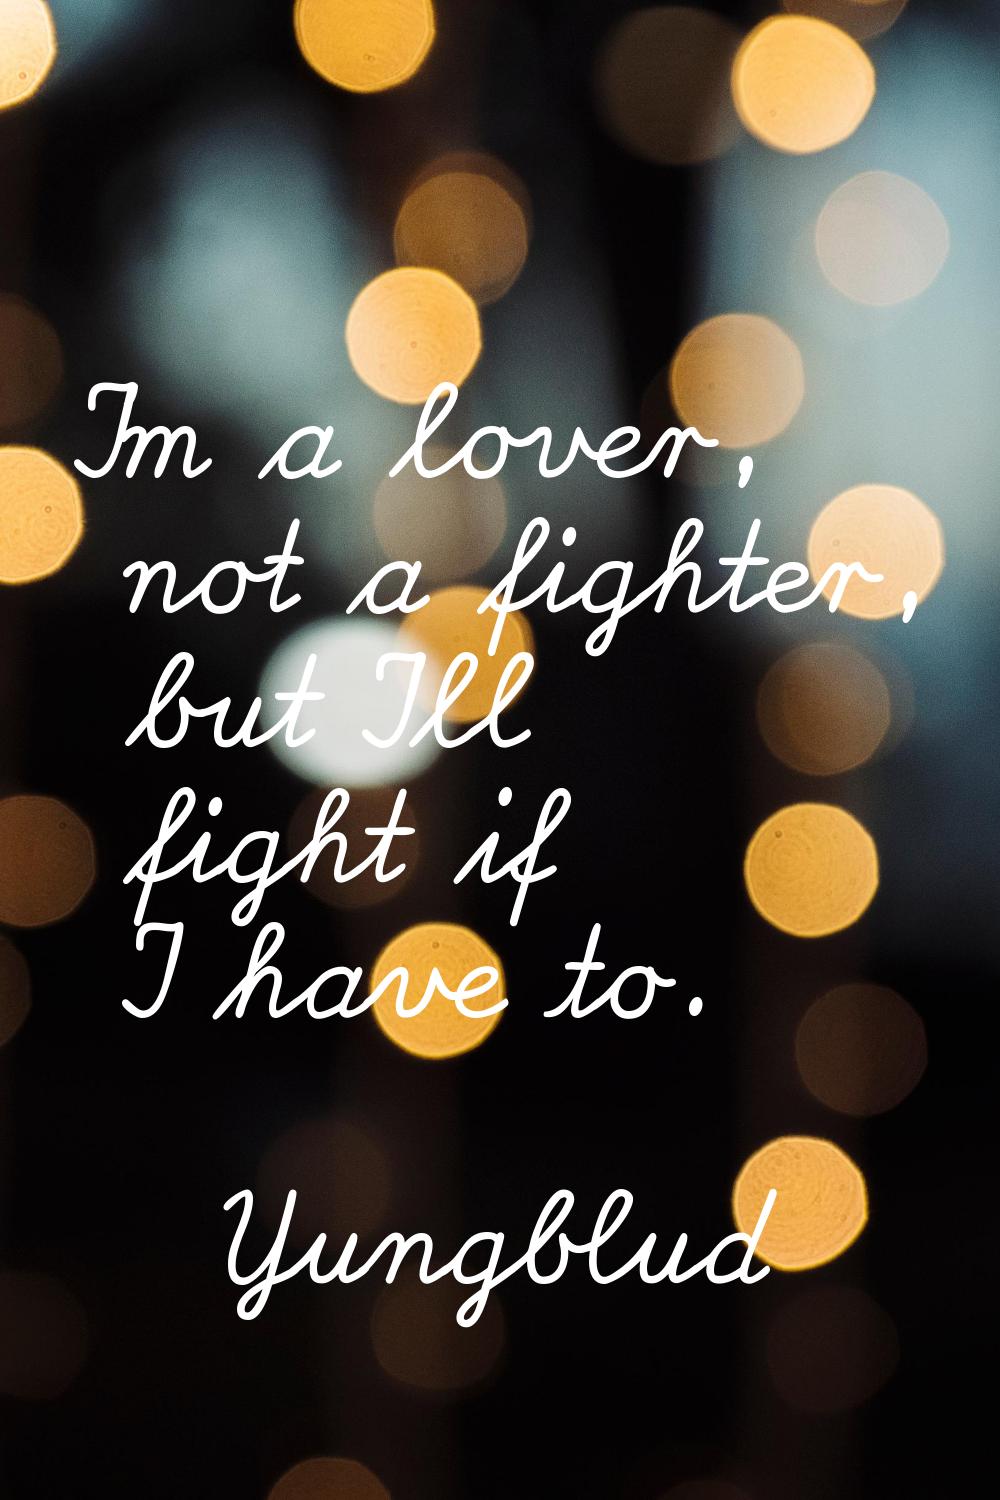 I'm a lover, not a fighter, but I'll fight if I have to.